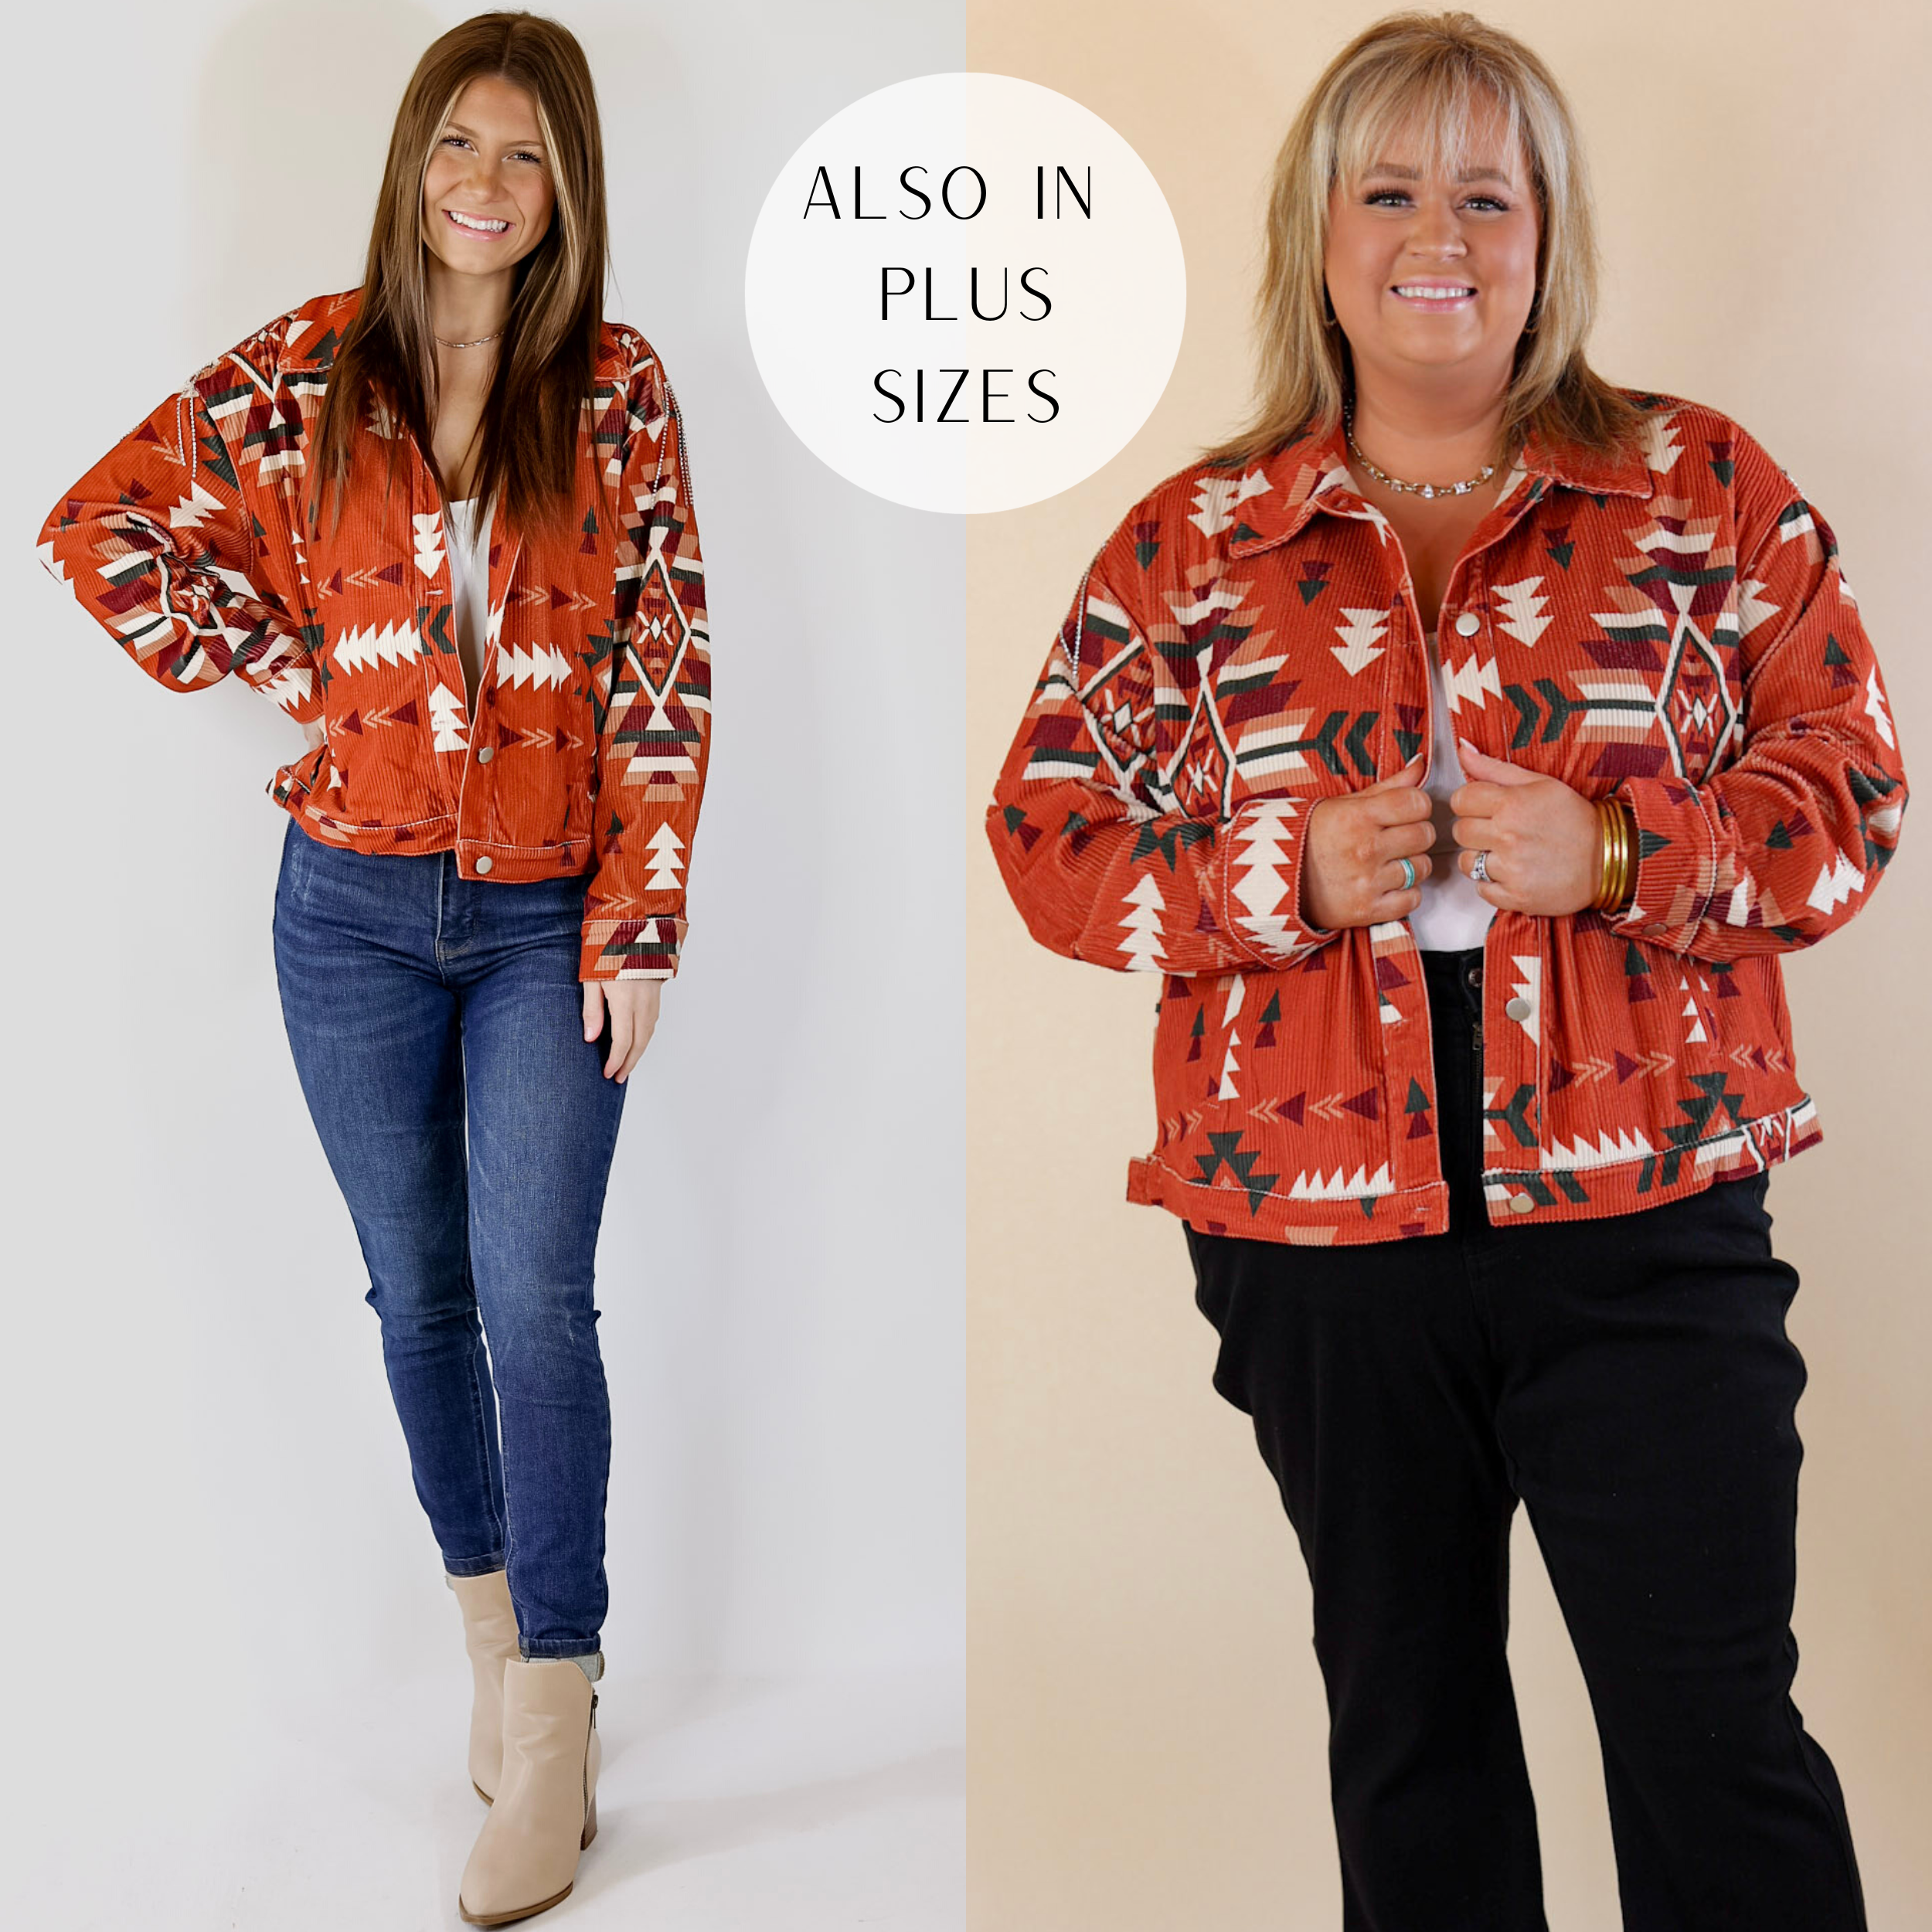 In the picture the model is wearing a Aztec Print Jacket with Crystal Fringe in Rust Orange with a white background